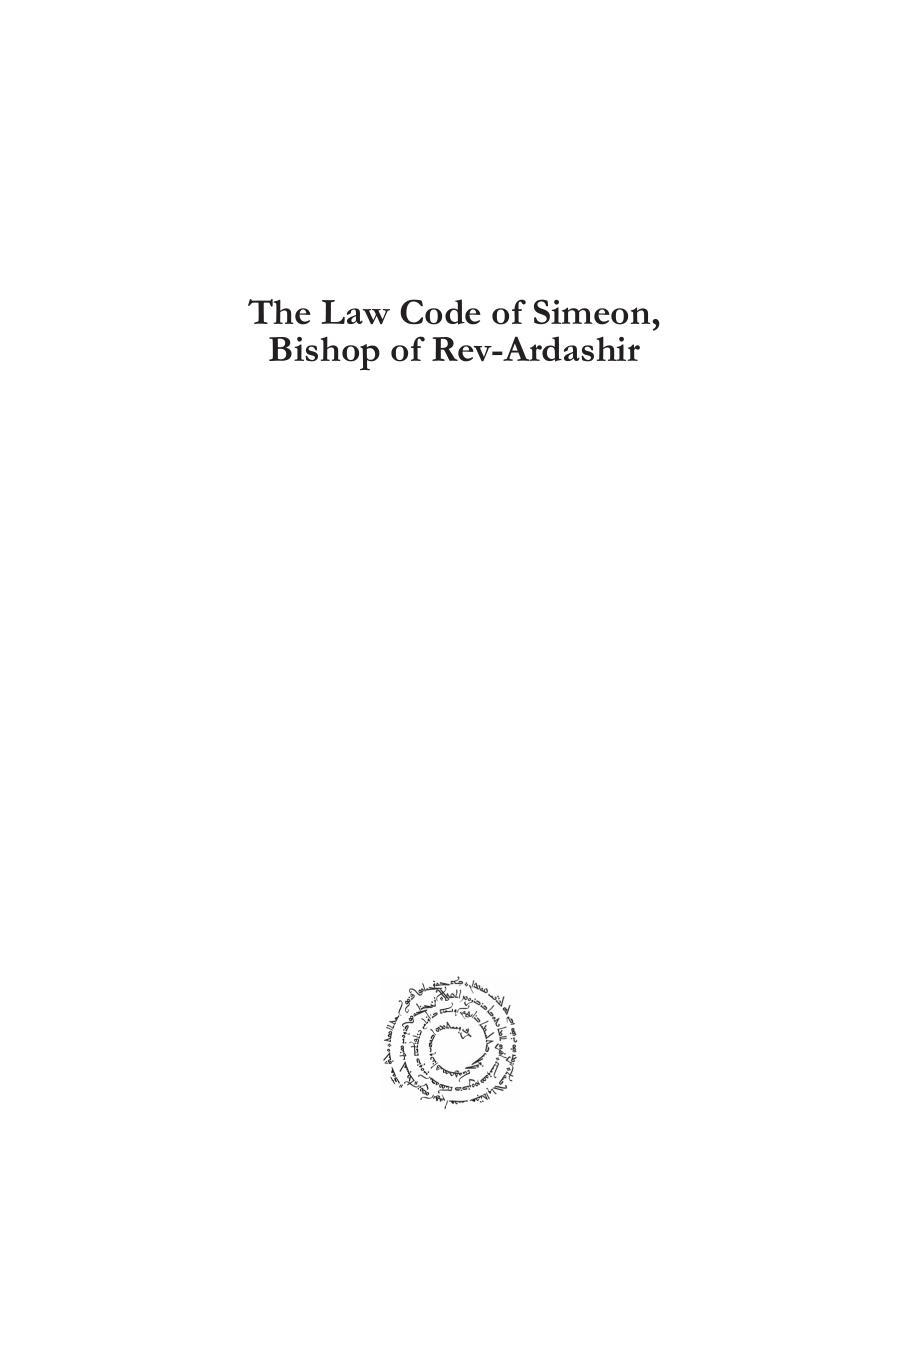 The Law Code of Simeon, Bishop of Rev-Ardashir (Texts from Christian Late Antiquity) by Edited by Amir Harrak